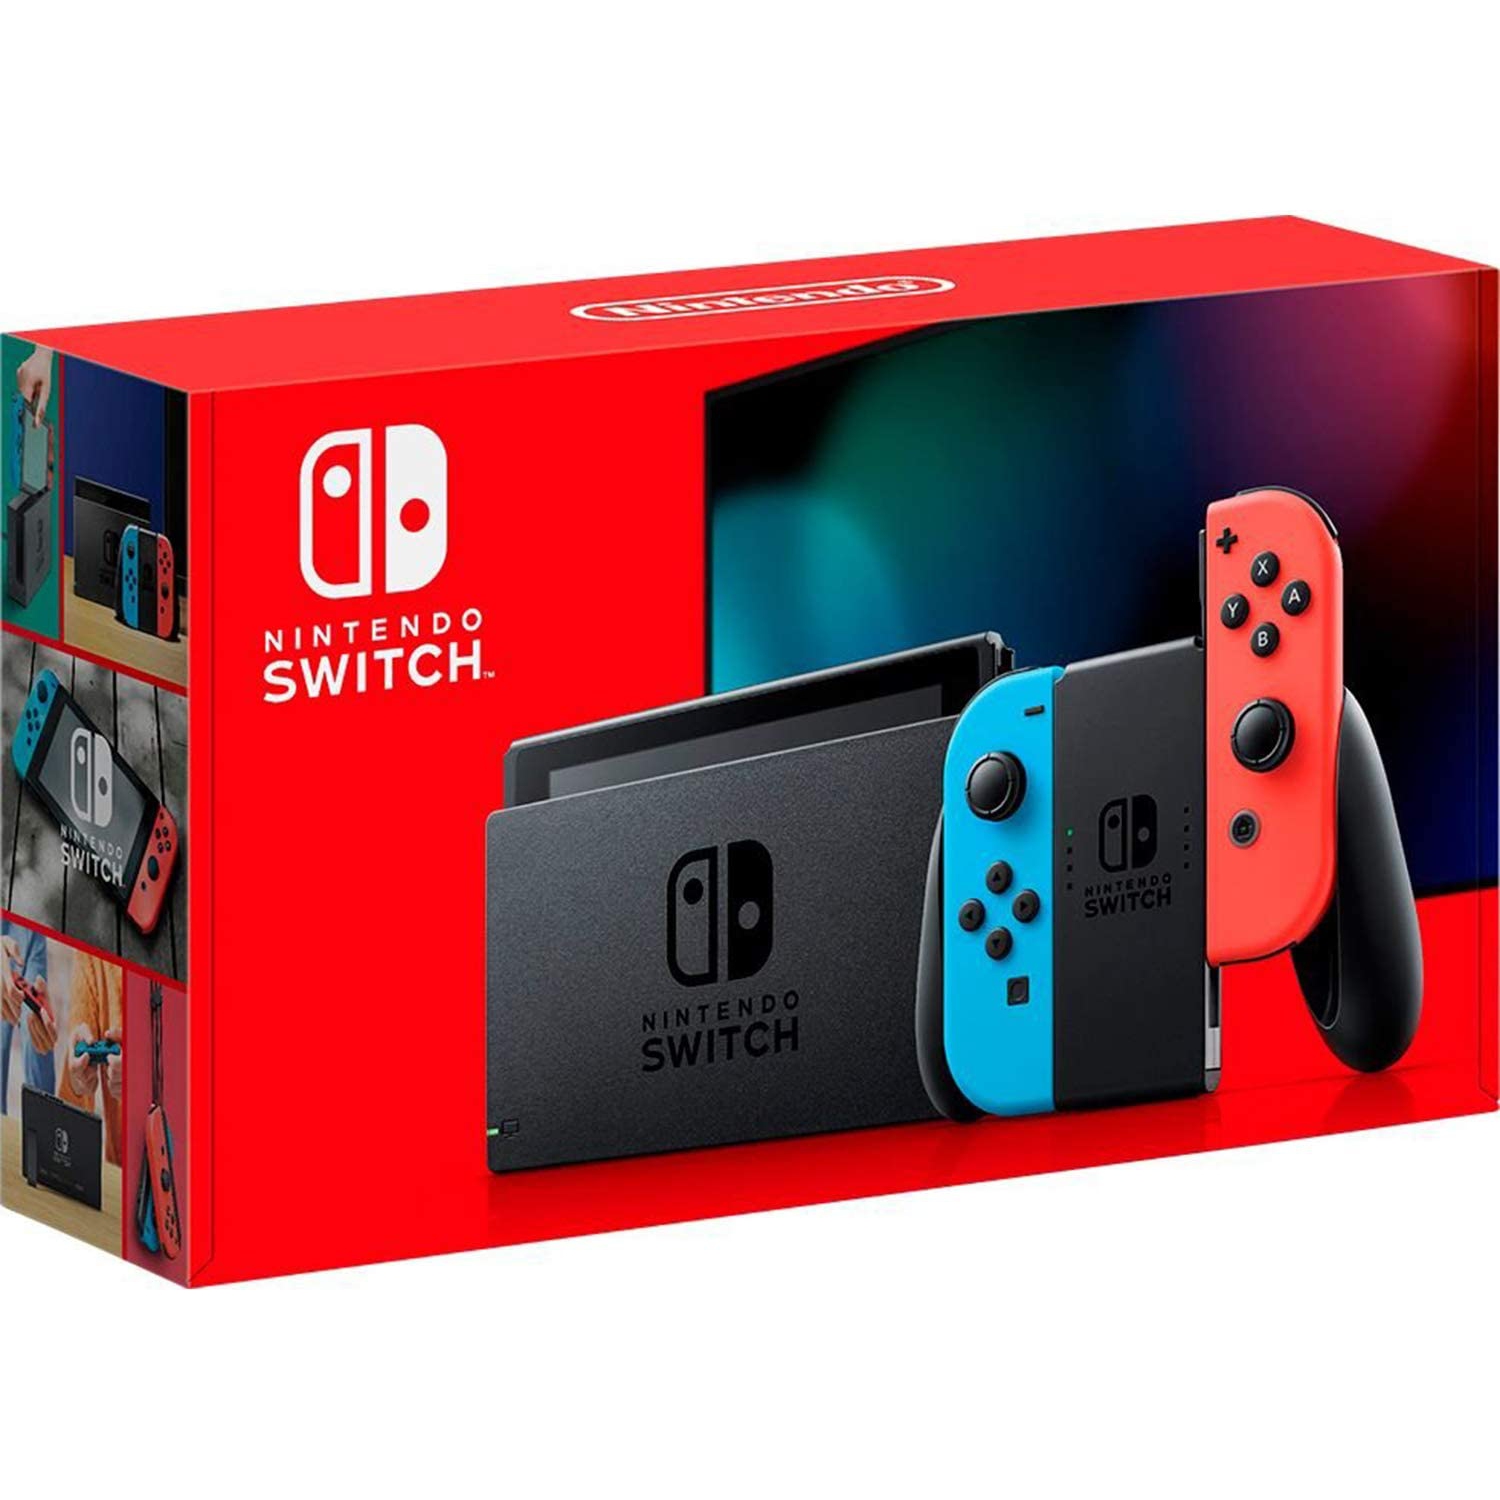 Nintendo Switch Console (2nd Generation, Neon Blue and Red) (EUROPEAN MODEL/VERSION) - Brand New